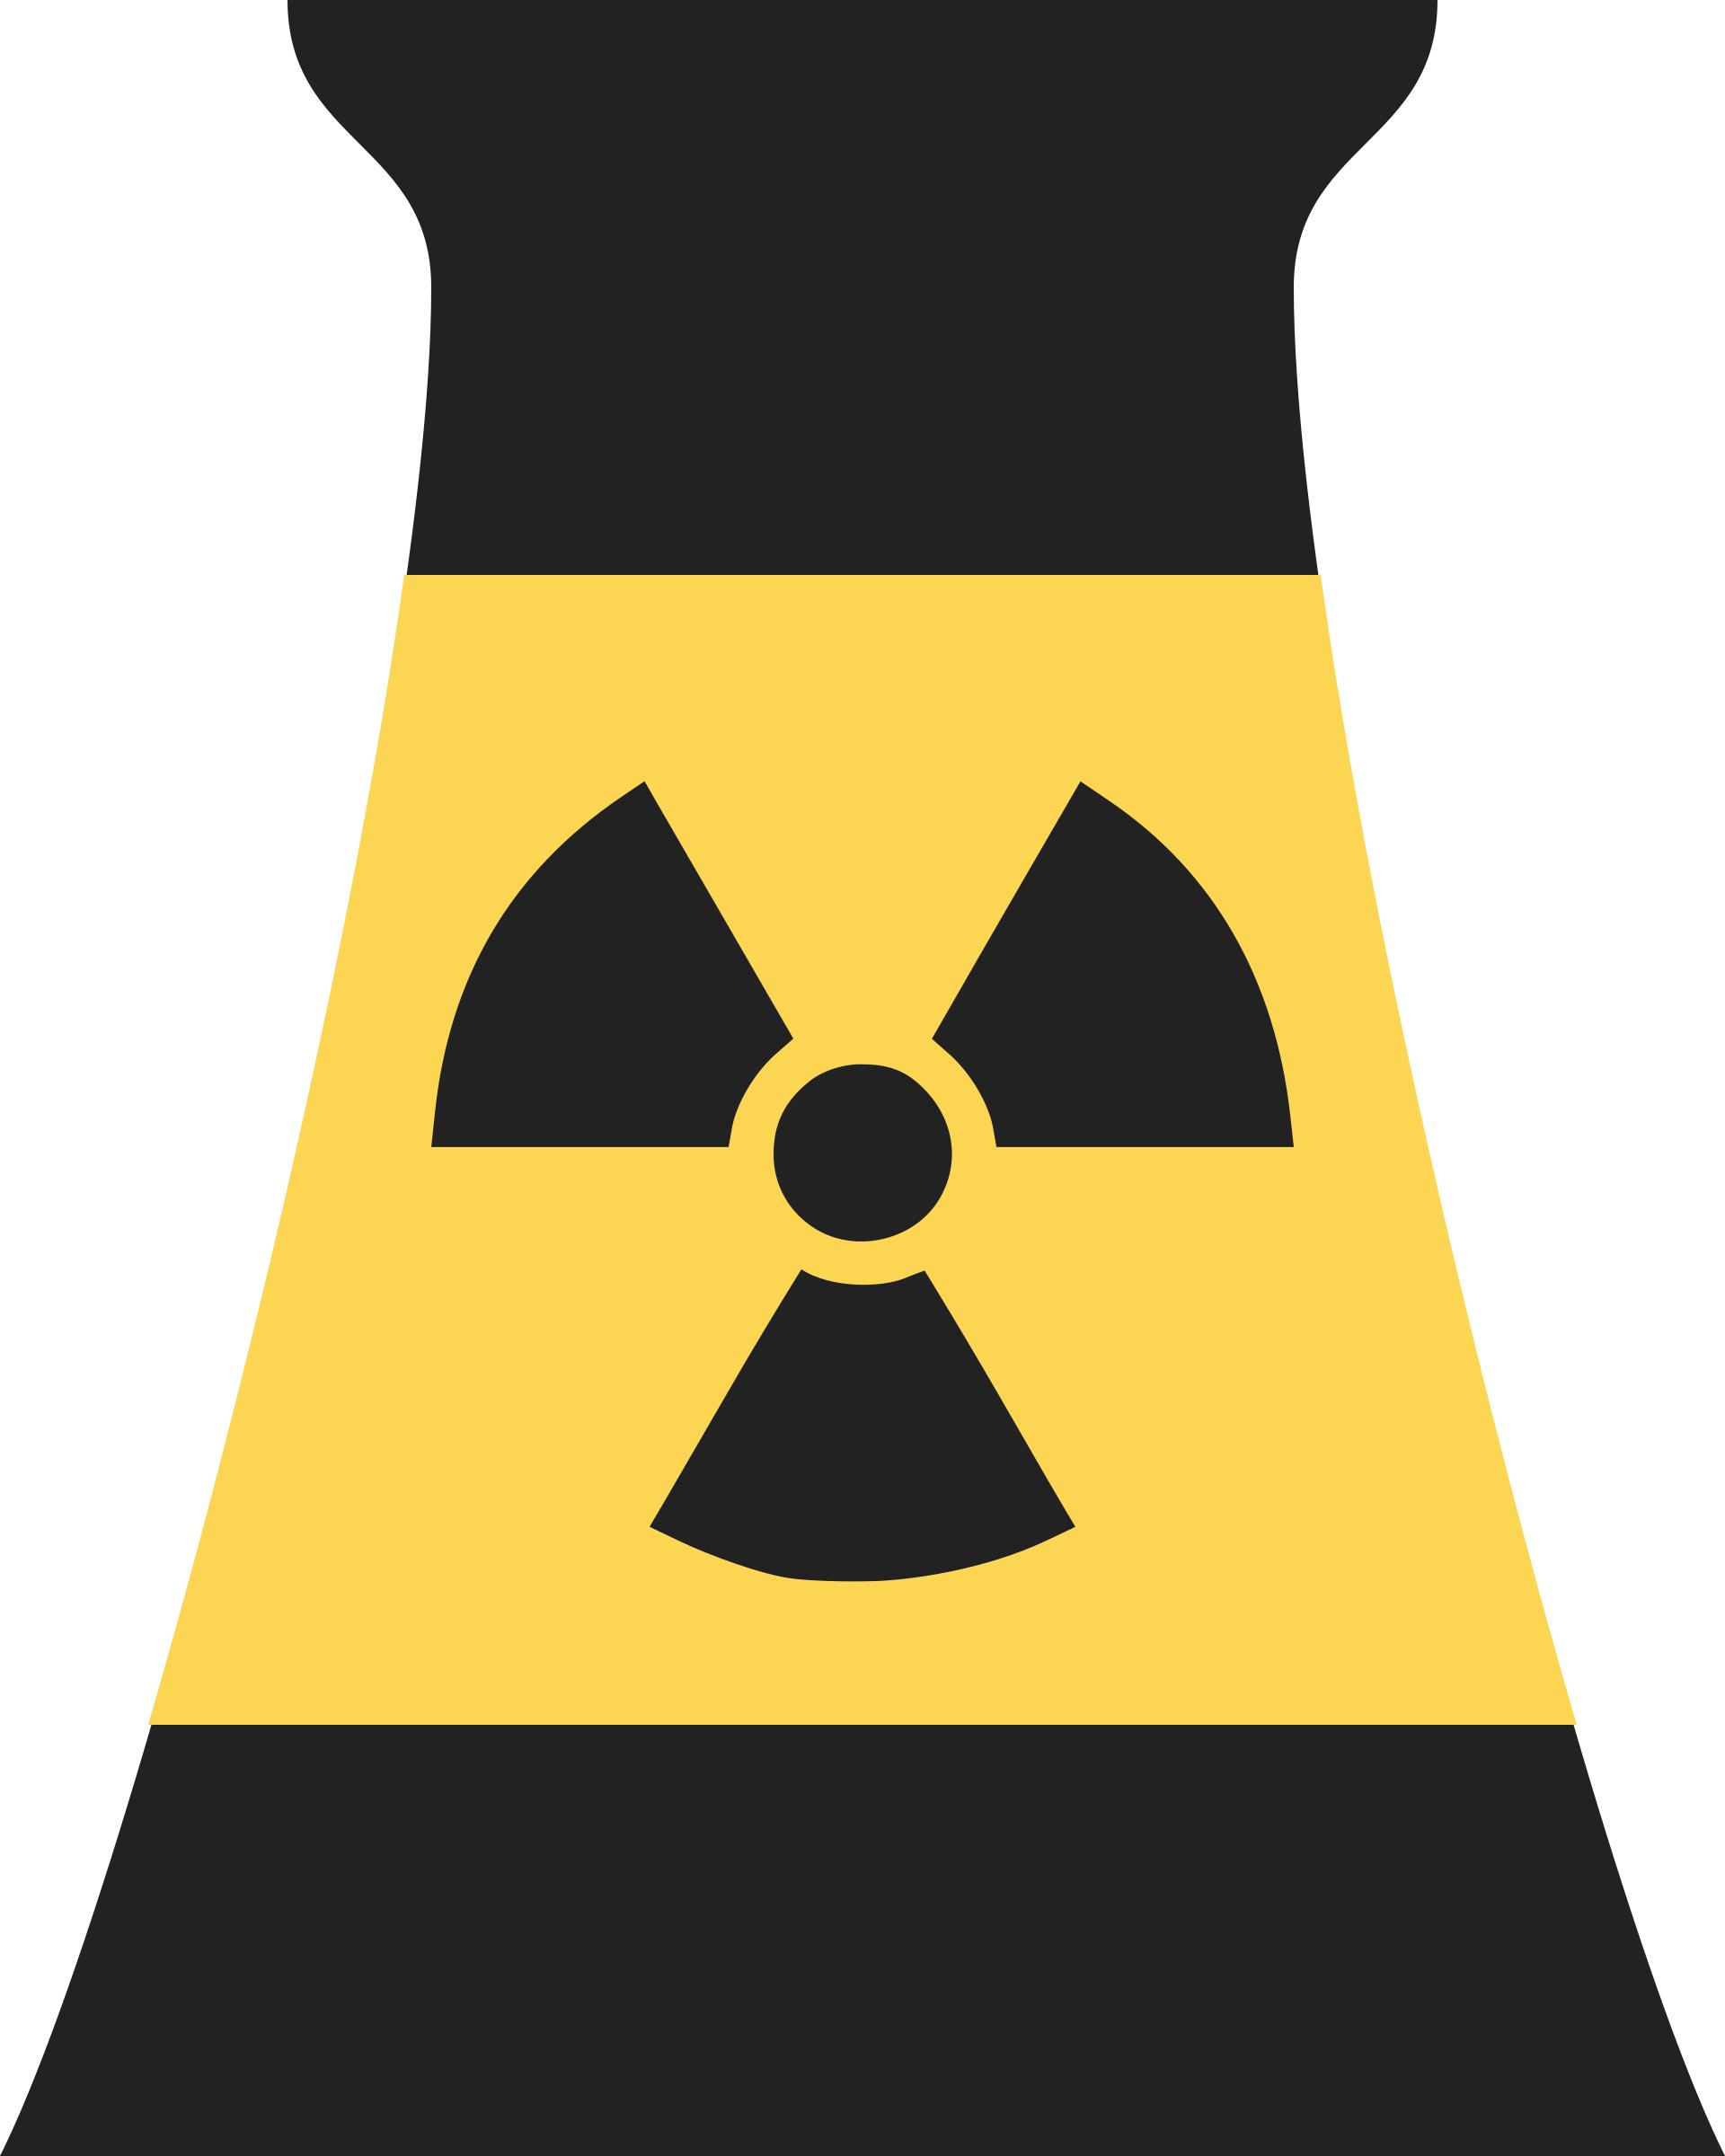 Nuclear Power Plant Reactor Symbol 2 png